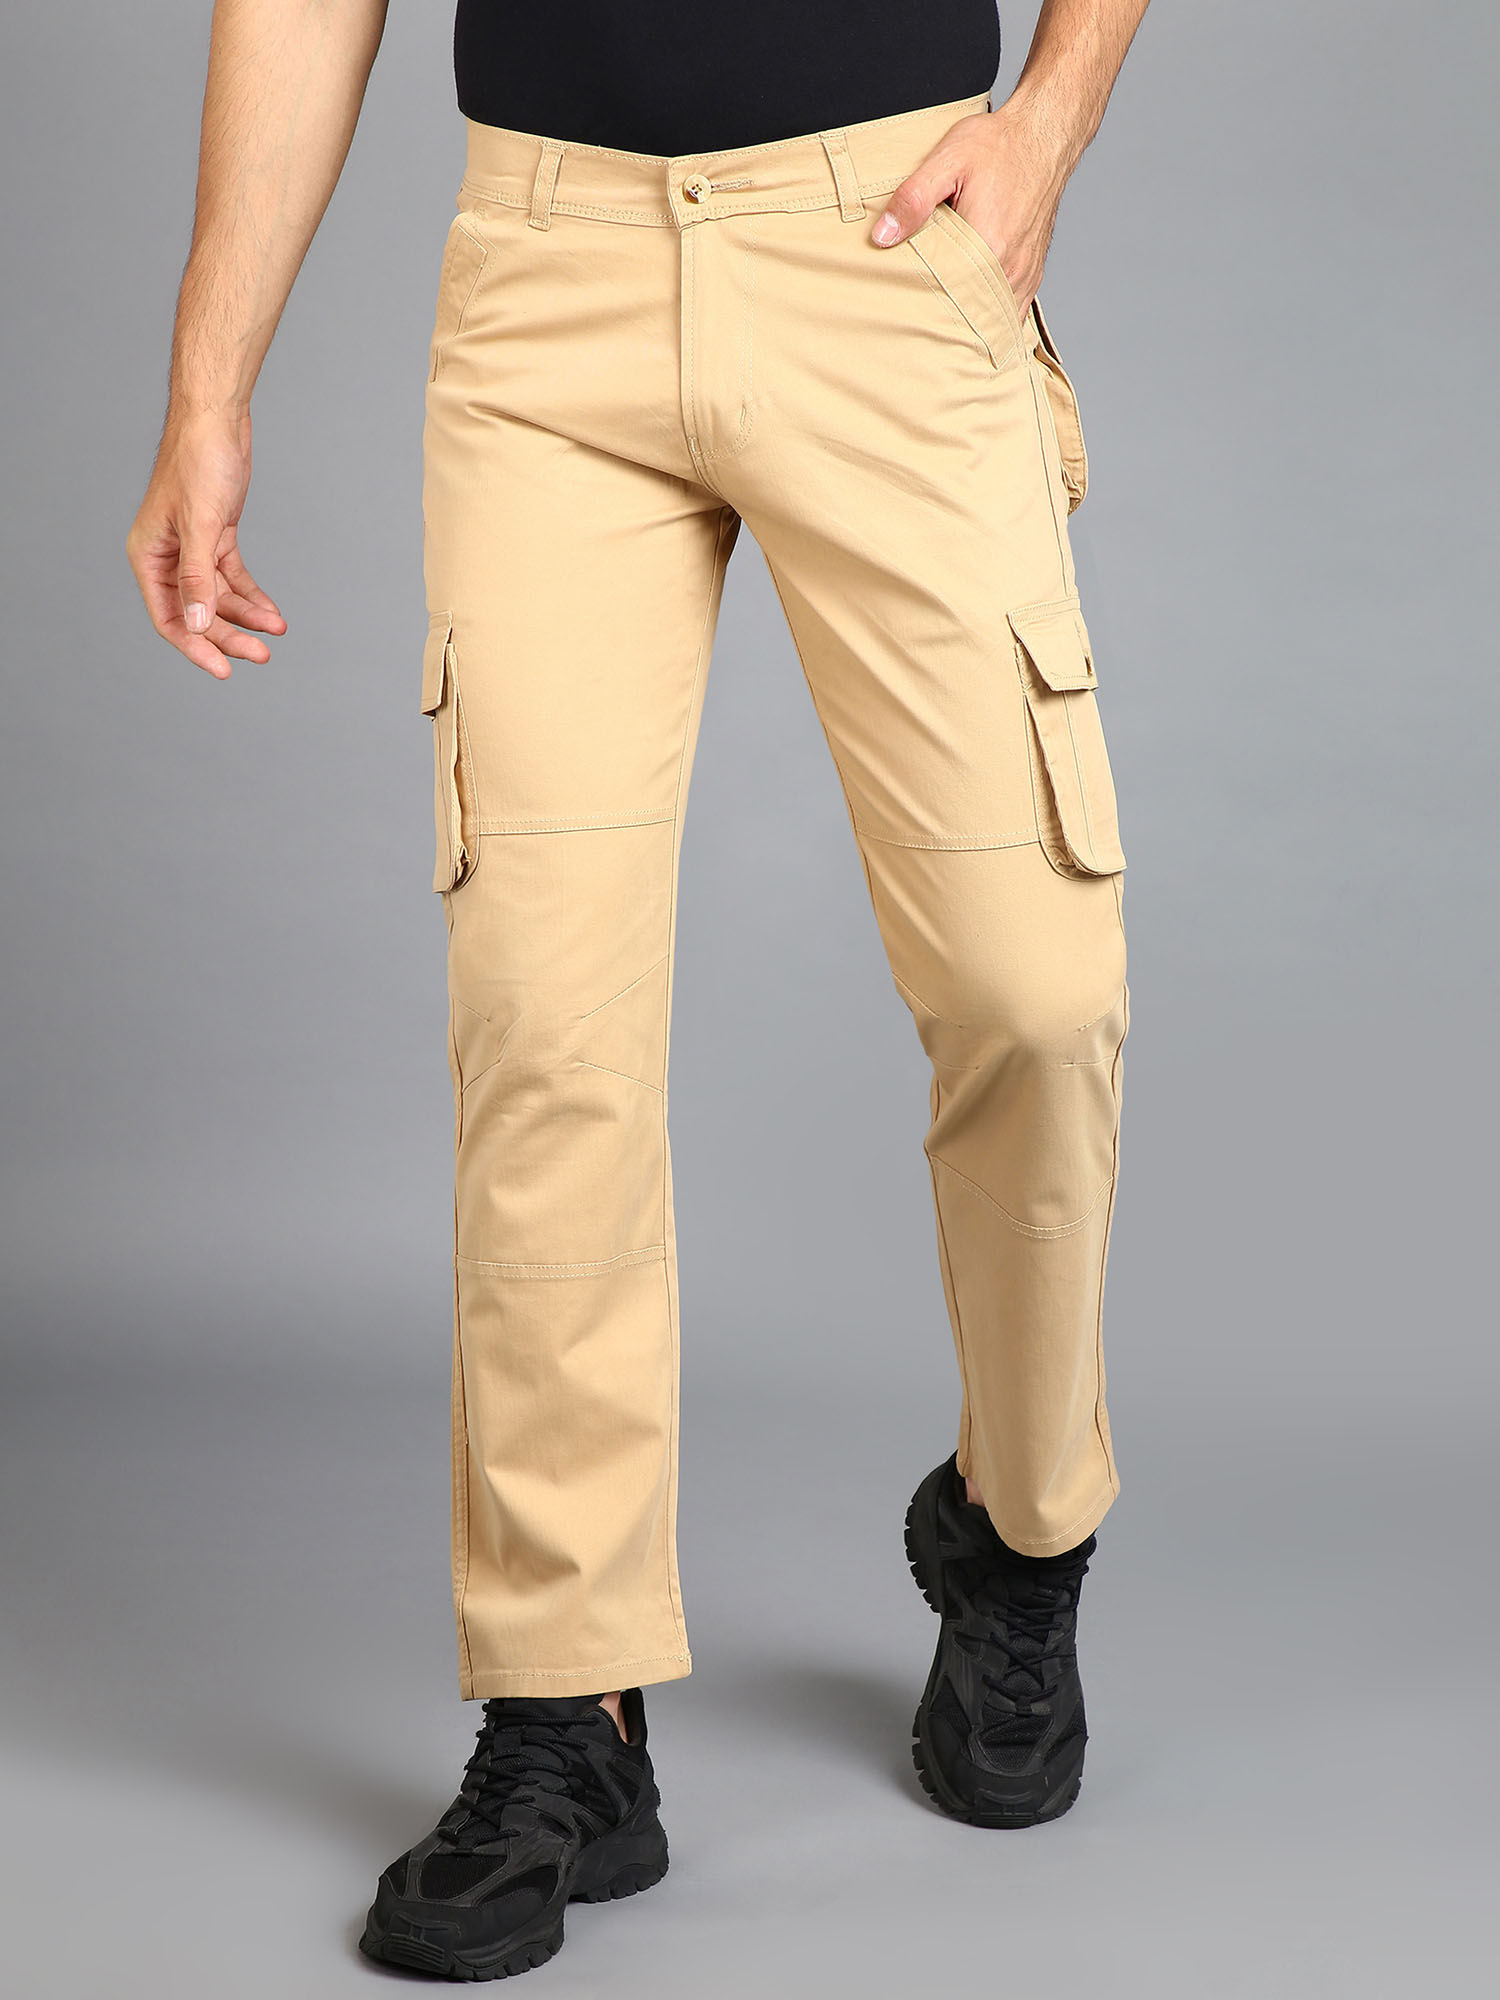 Stacked Flare Bottom Cargo Pants - Citi Trends